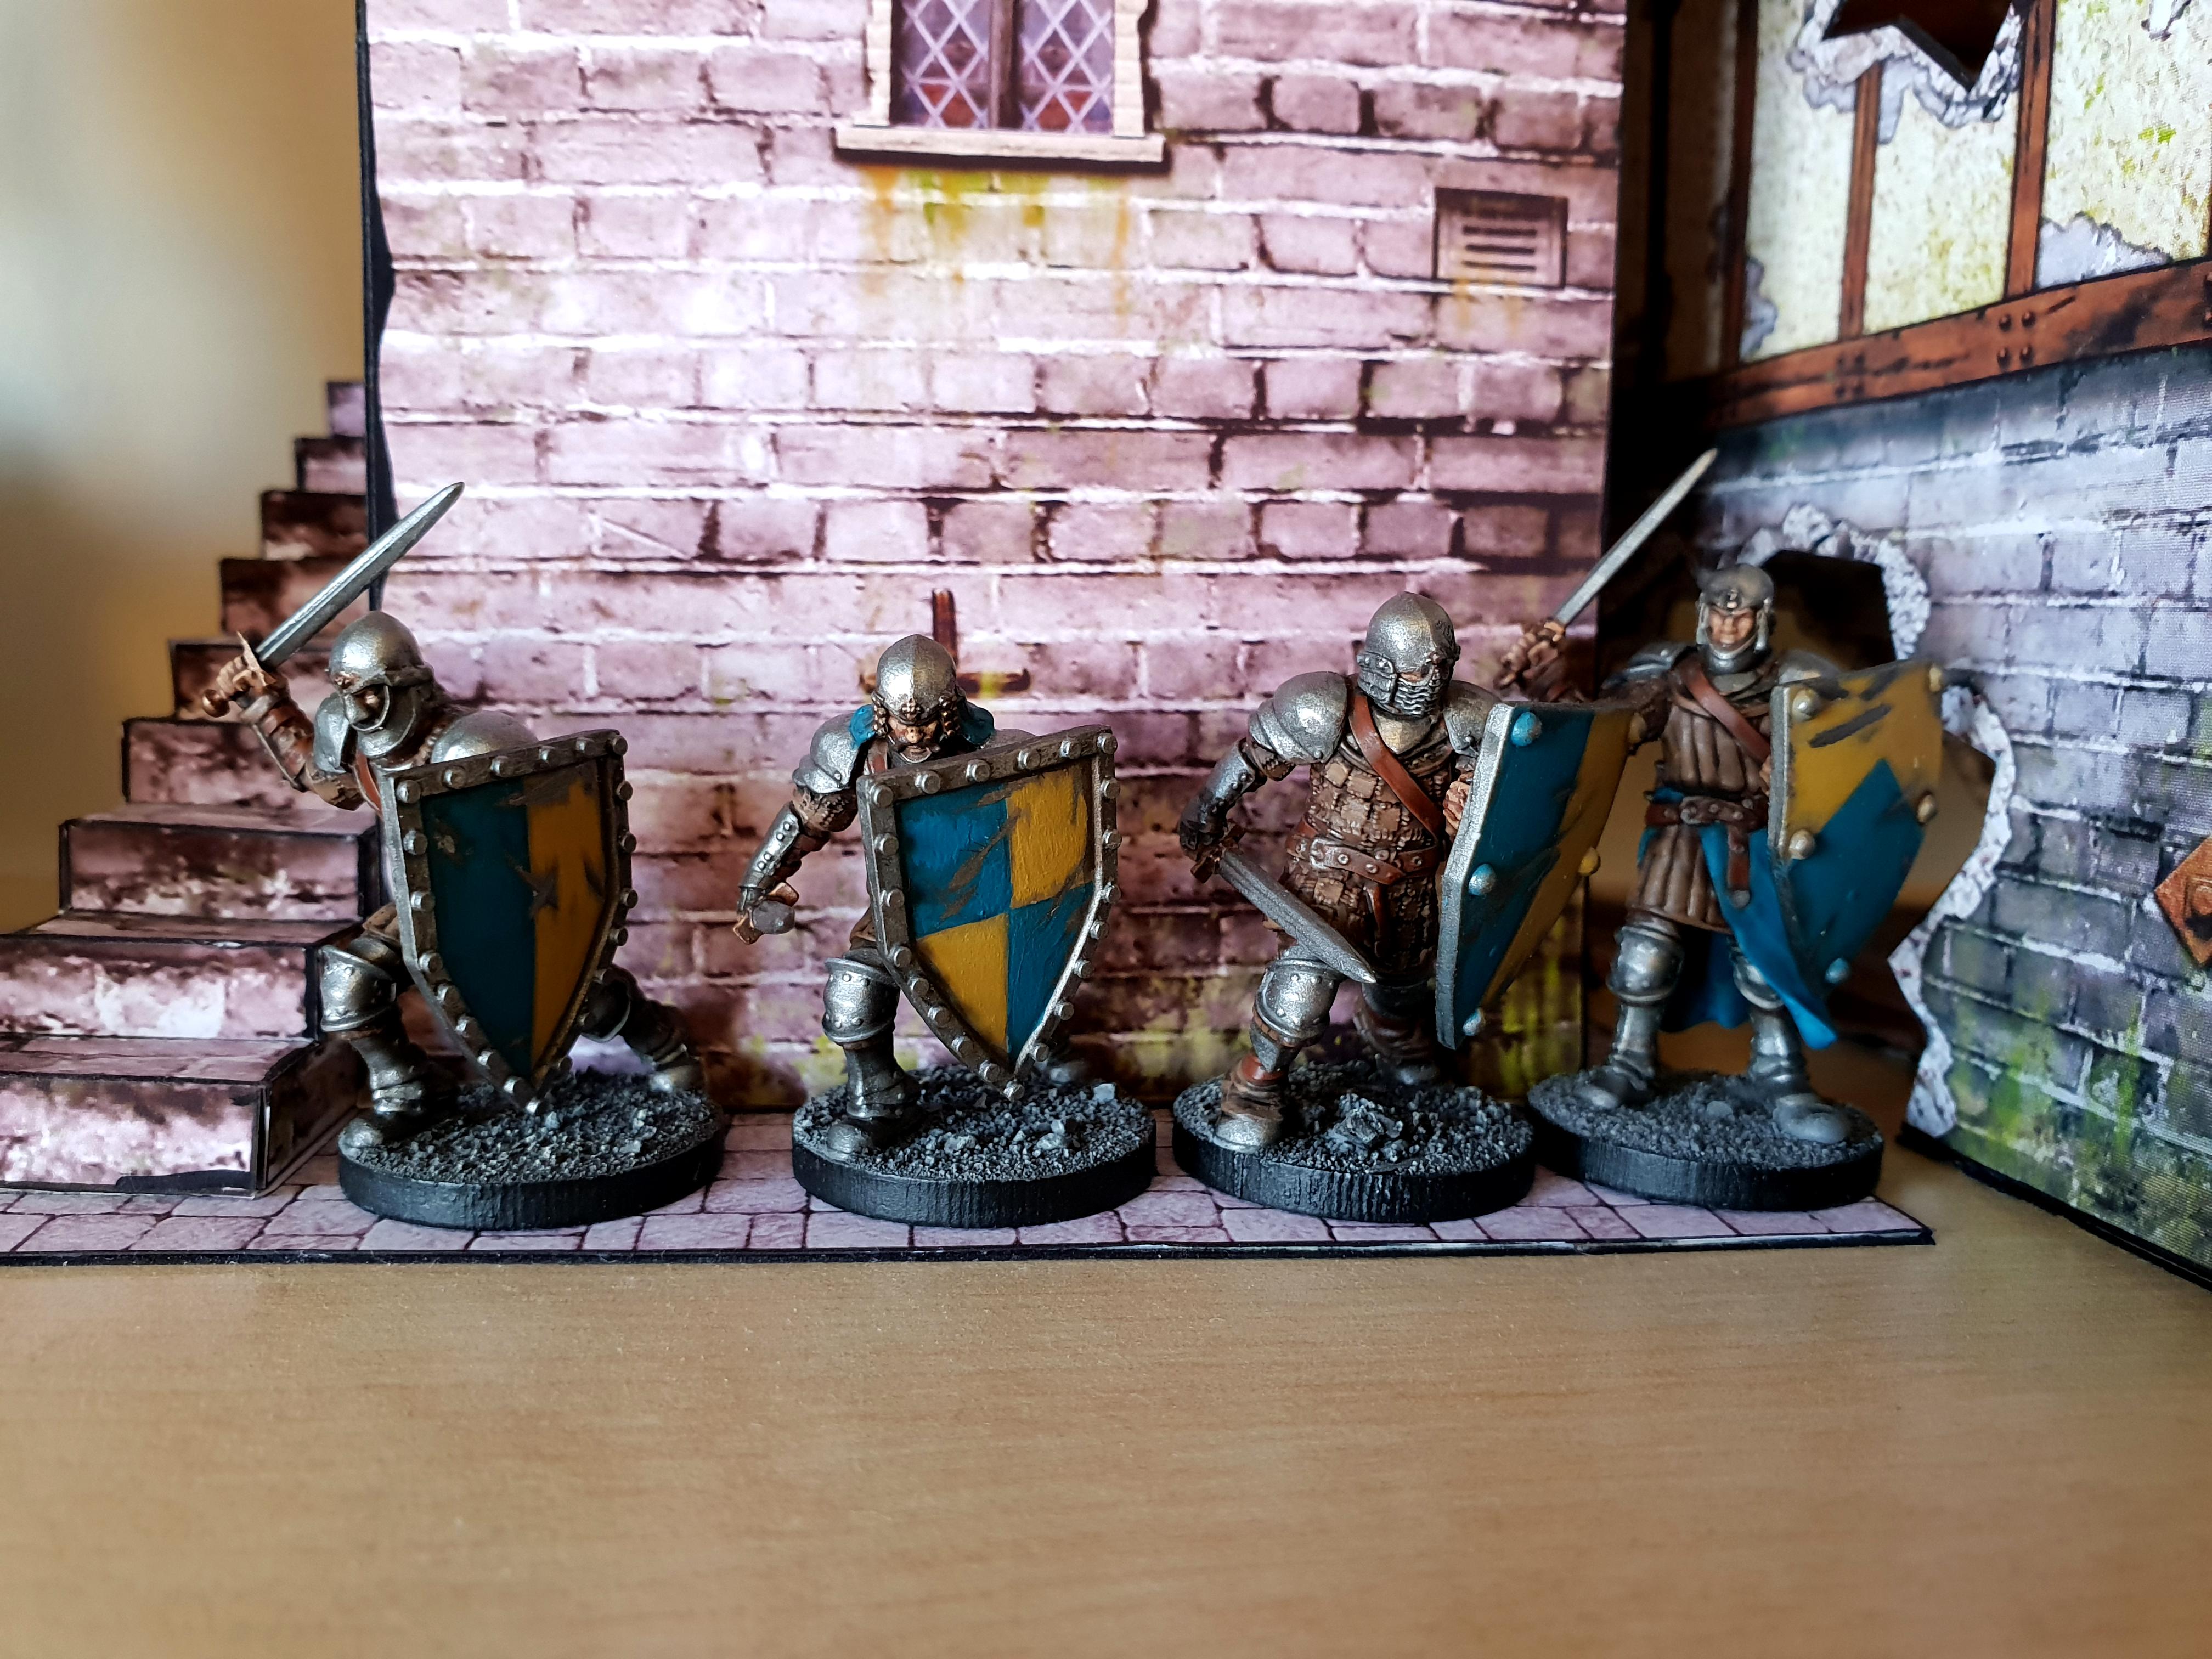 100 Kingdoms, Hundred Kingdoms men at arms for conquest from para bellum